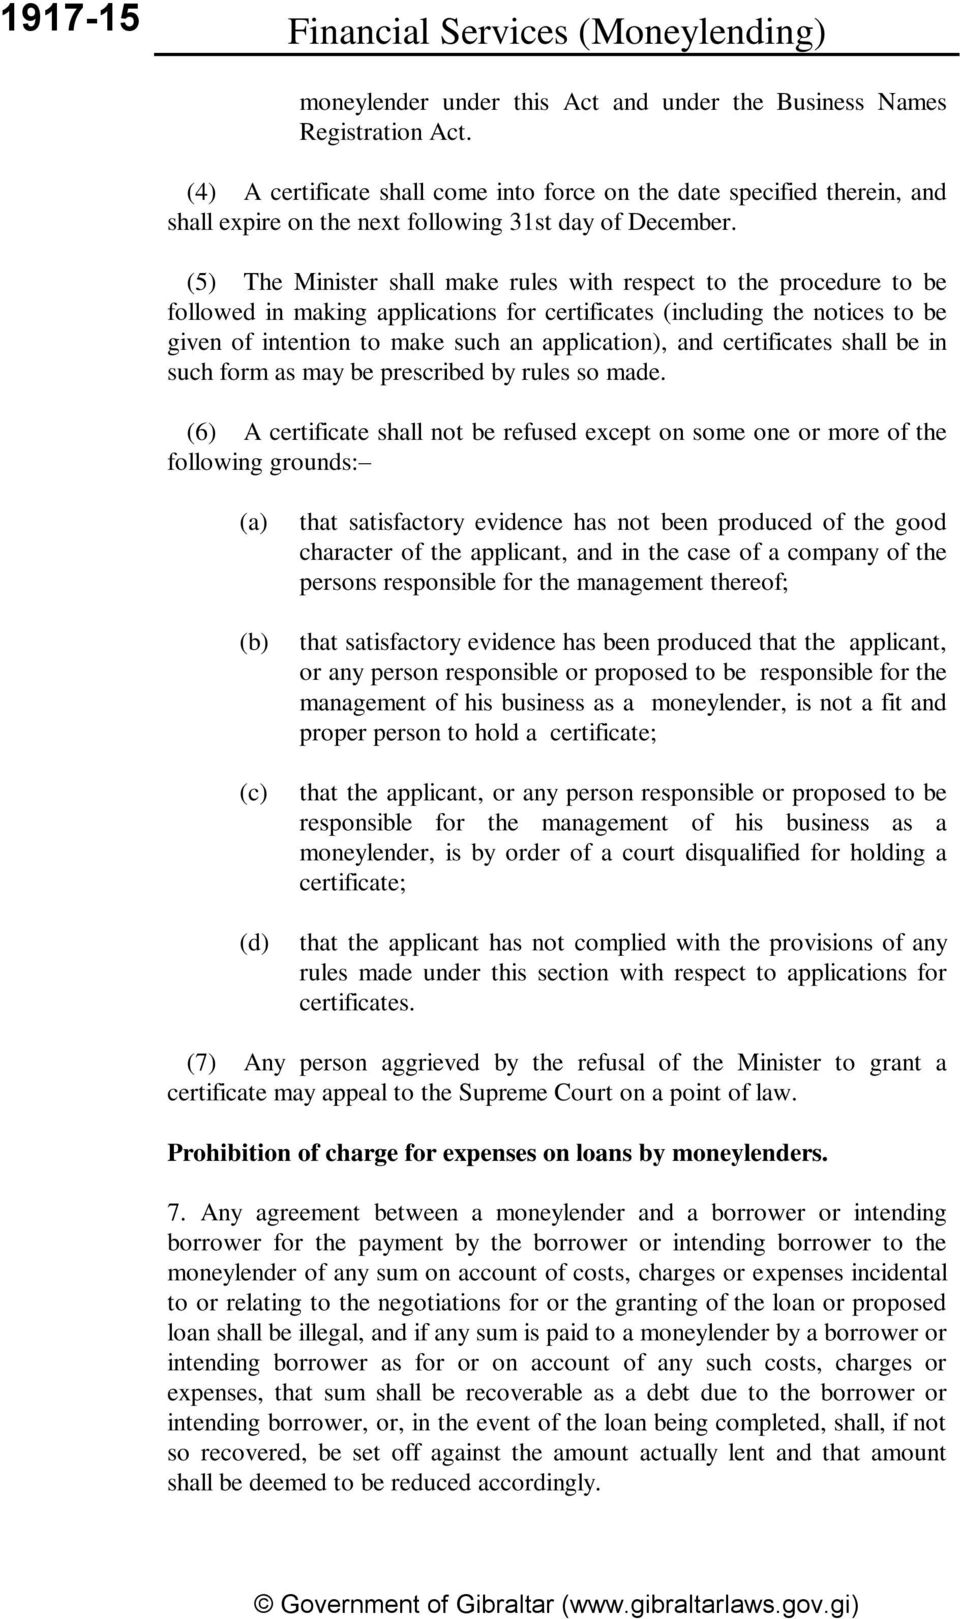 (5) The Minister shall make rules with respect to the procedure to be followed in making applications for certificates (including the notices to be given of intention to make such an application),